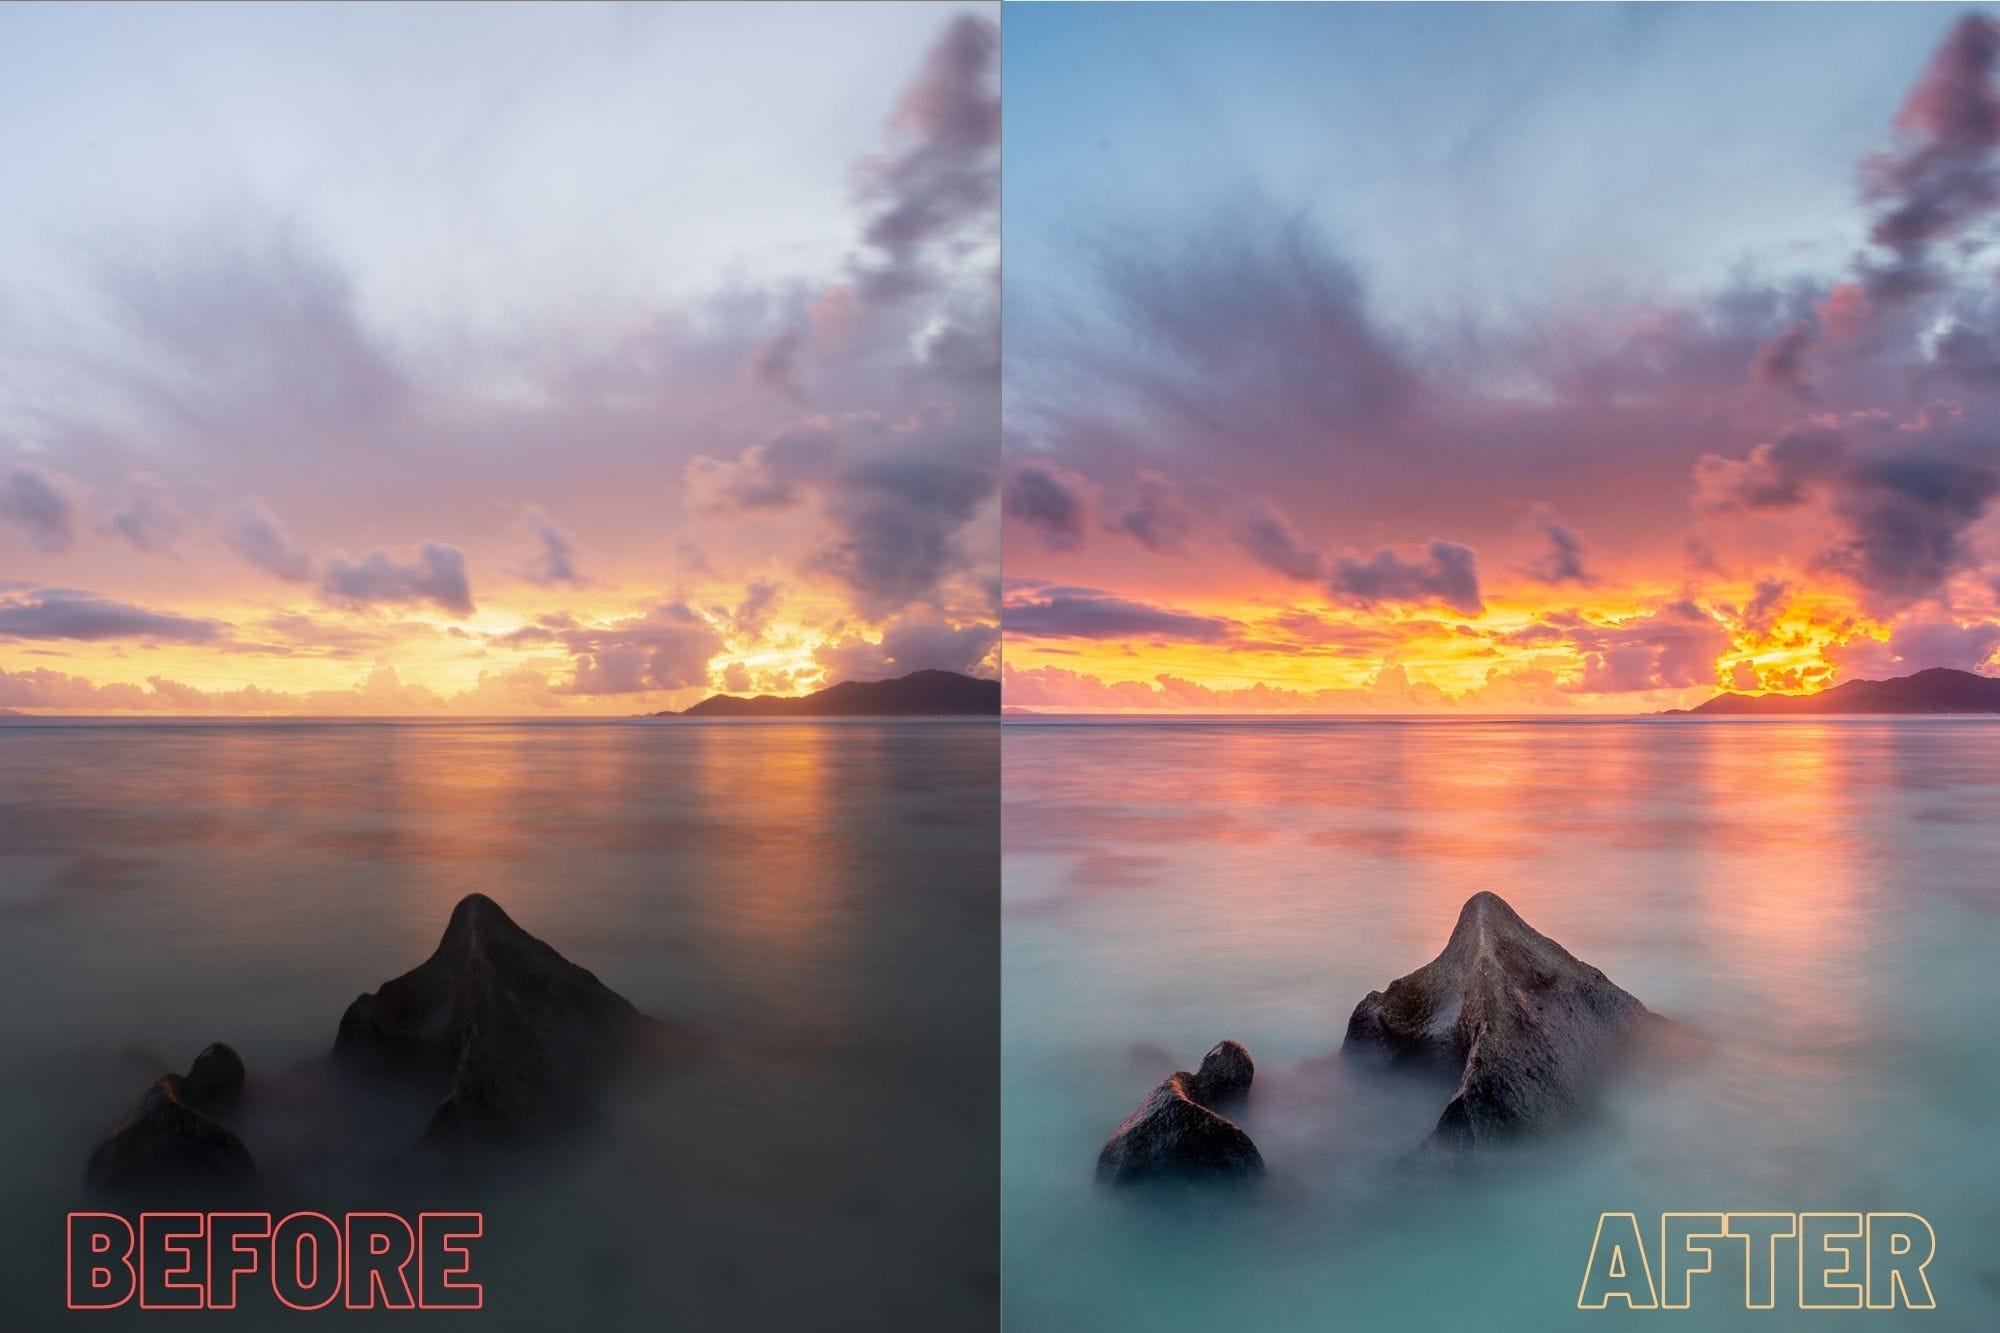 Free Lightroom Presets: Where to Download Free Presets and How to Install Them